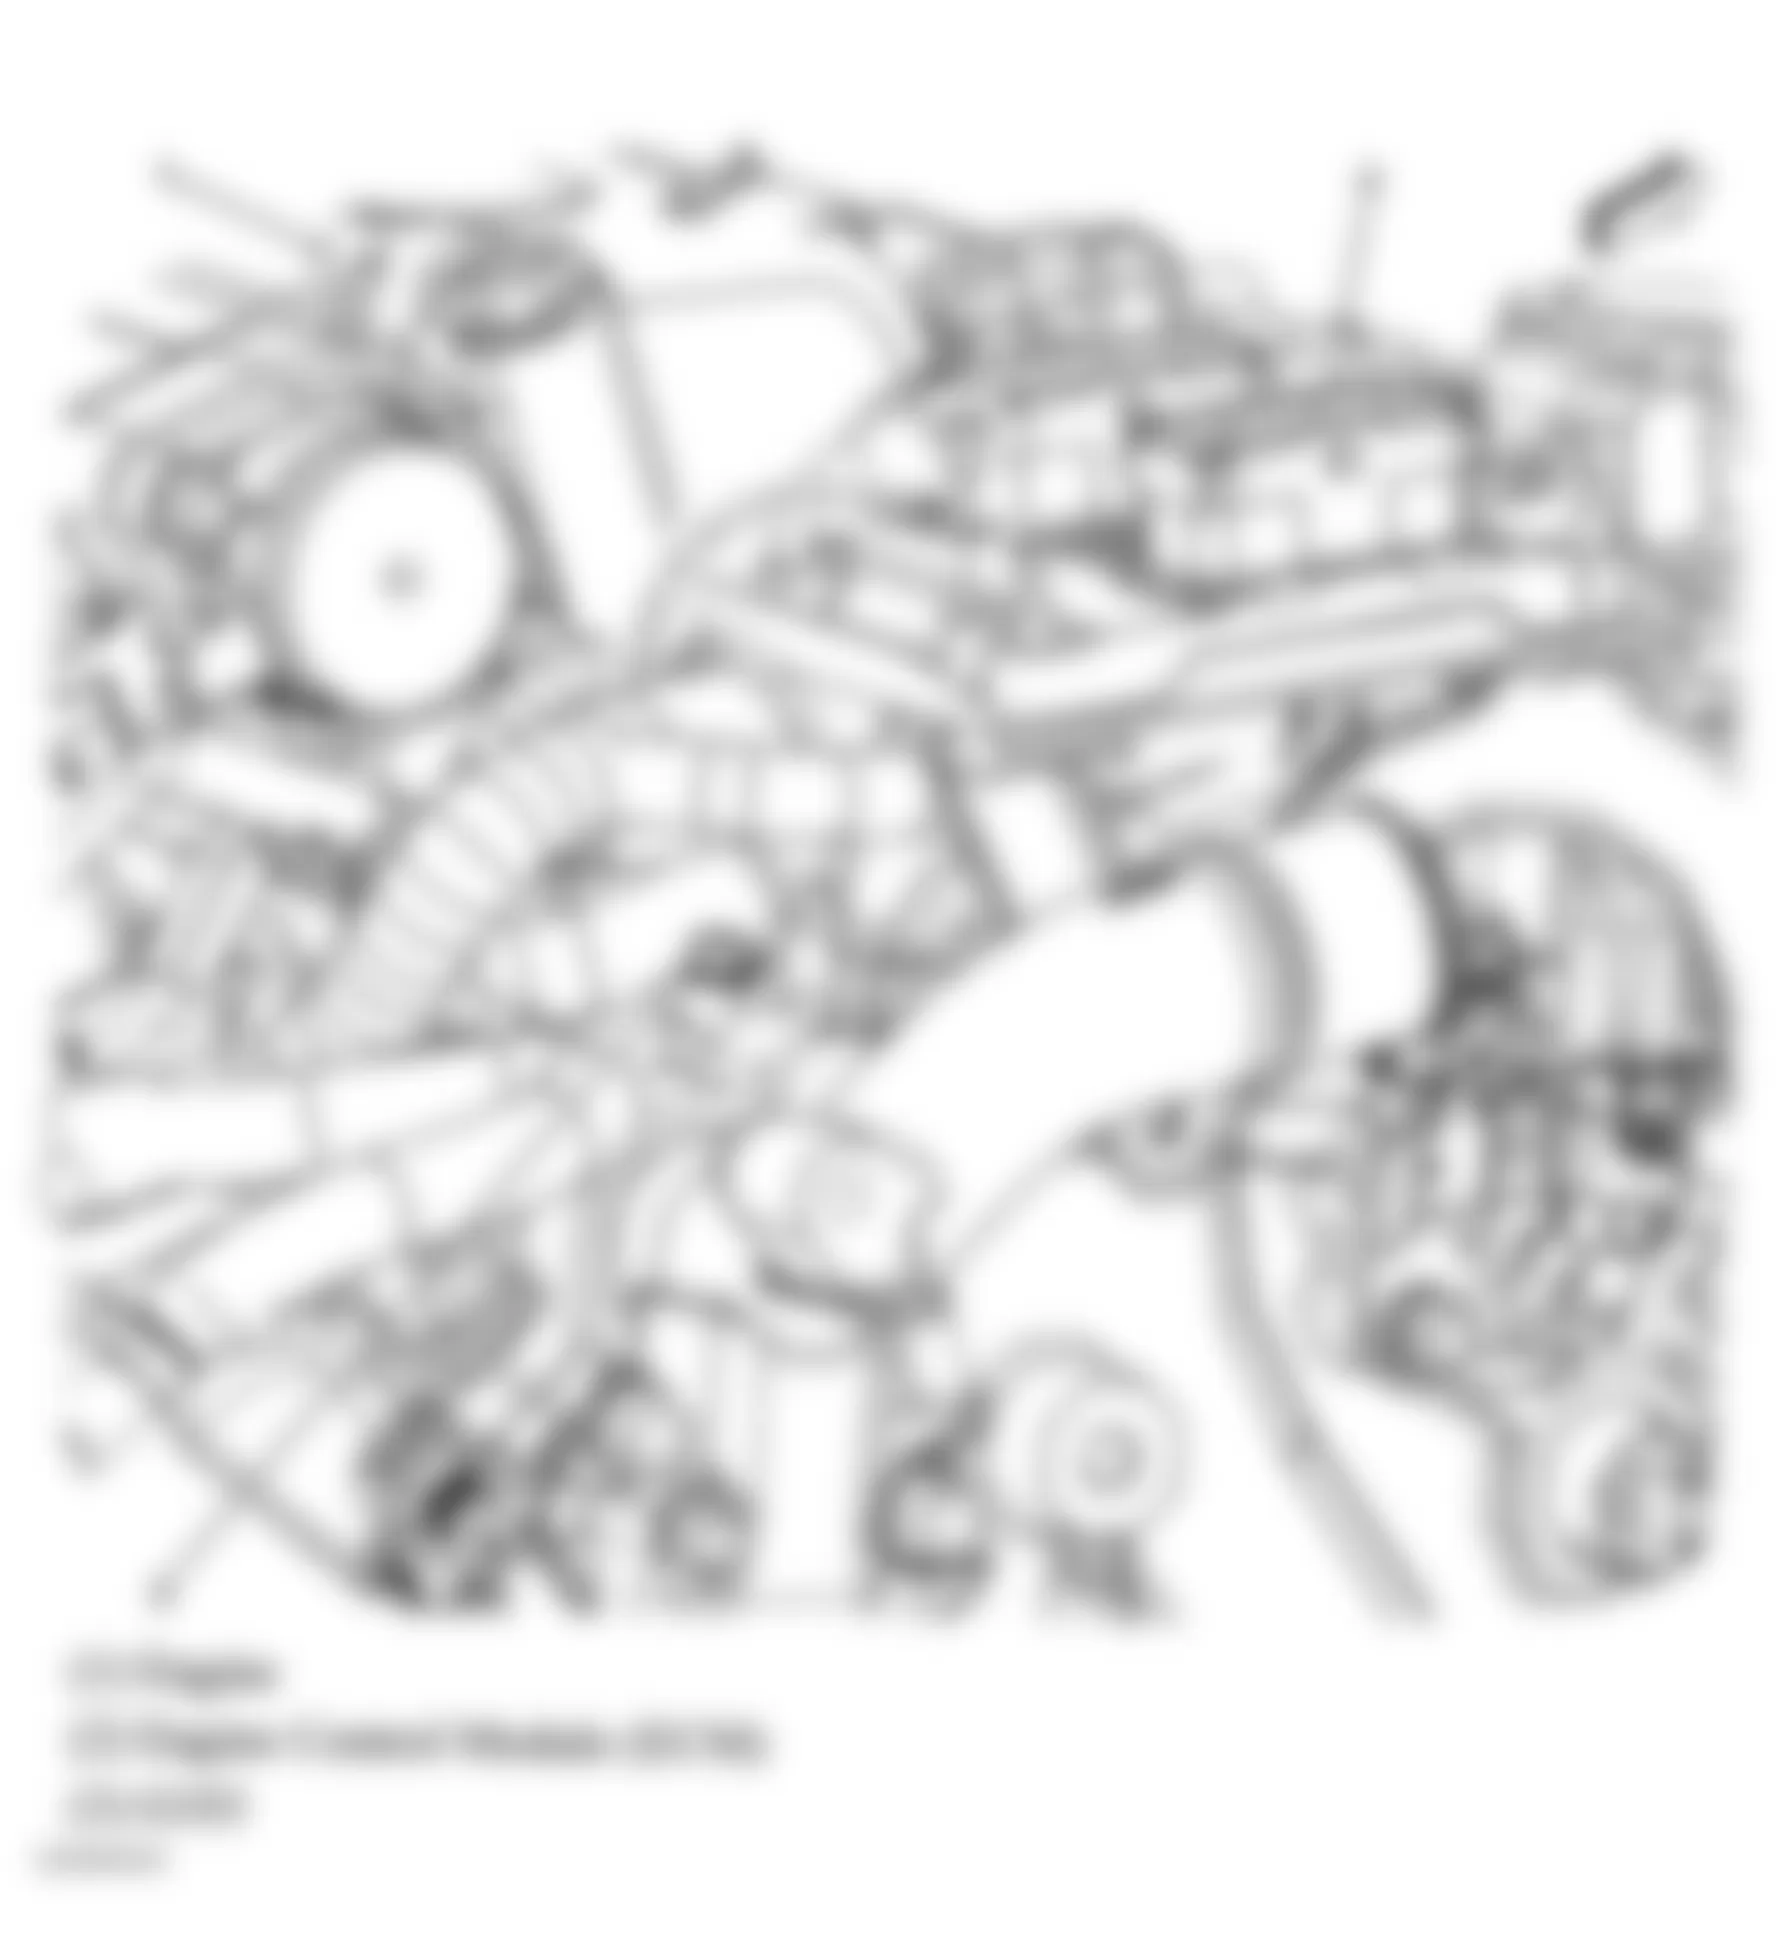 Buick LaCrosse CXL 2006 - Component Locations -  Engine Assembly (3.6L)